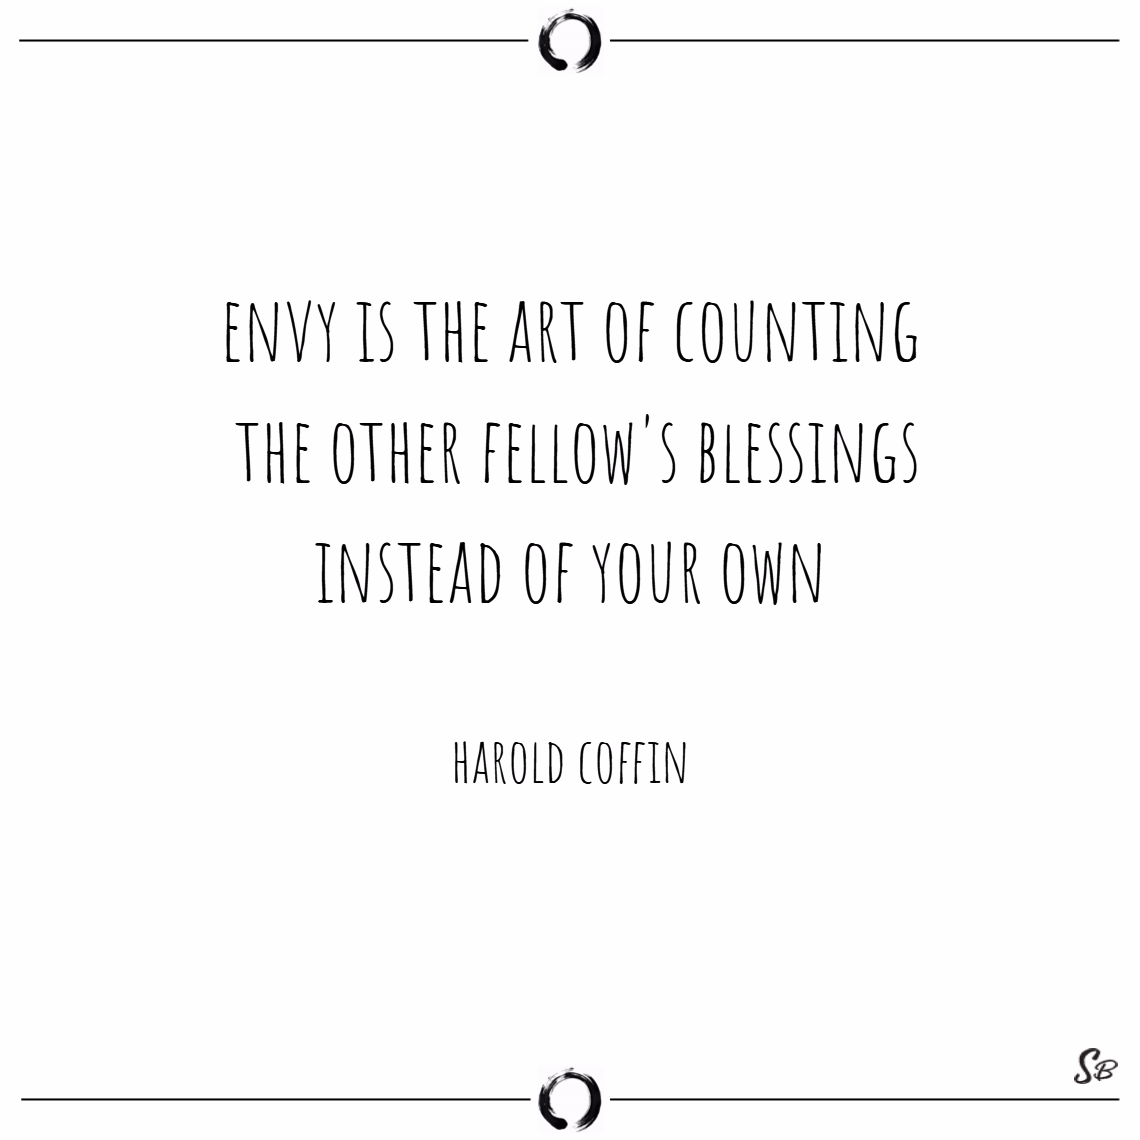 Envy is the art of counting the other fellow’s blessings instead of your own. harold coffin